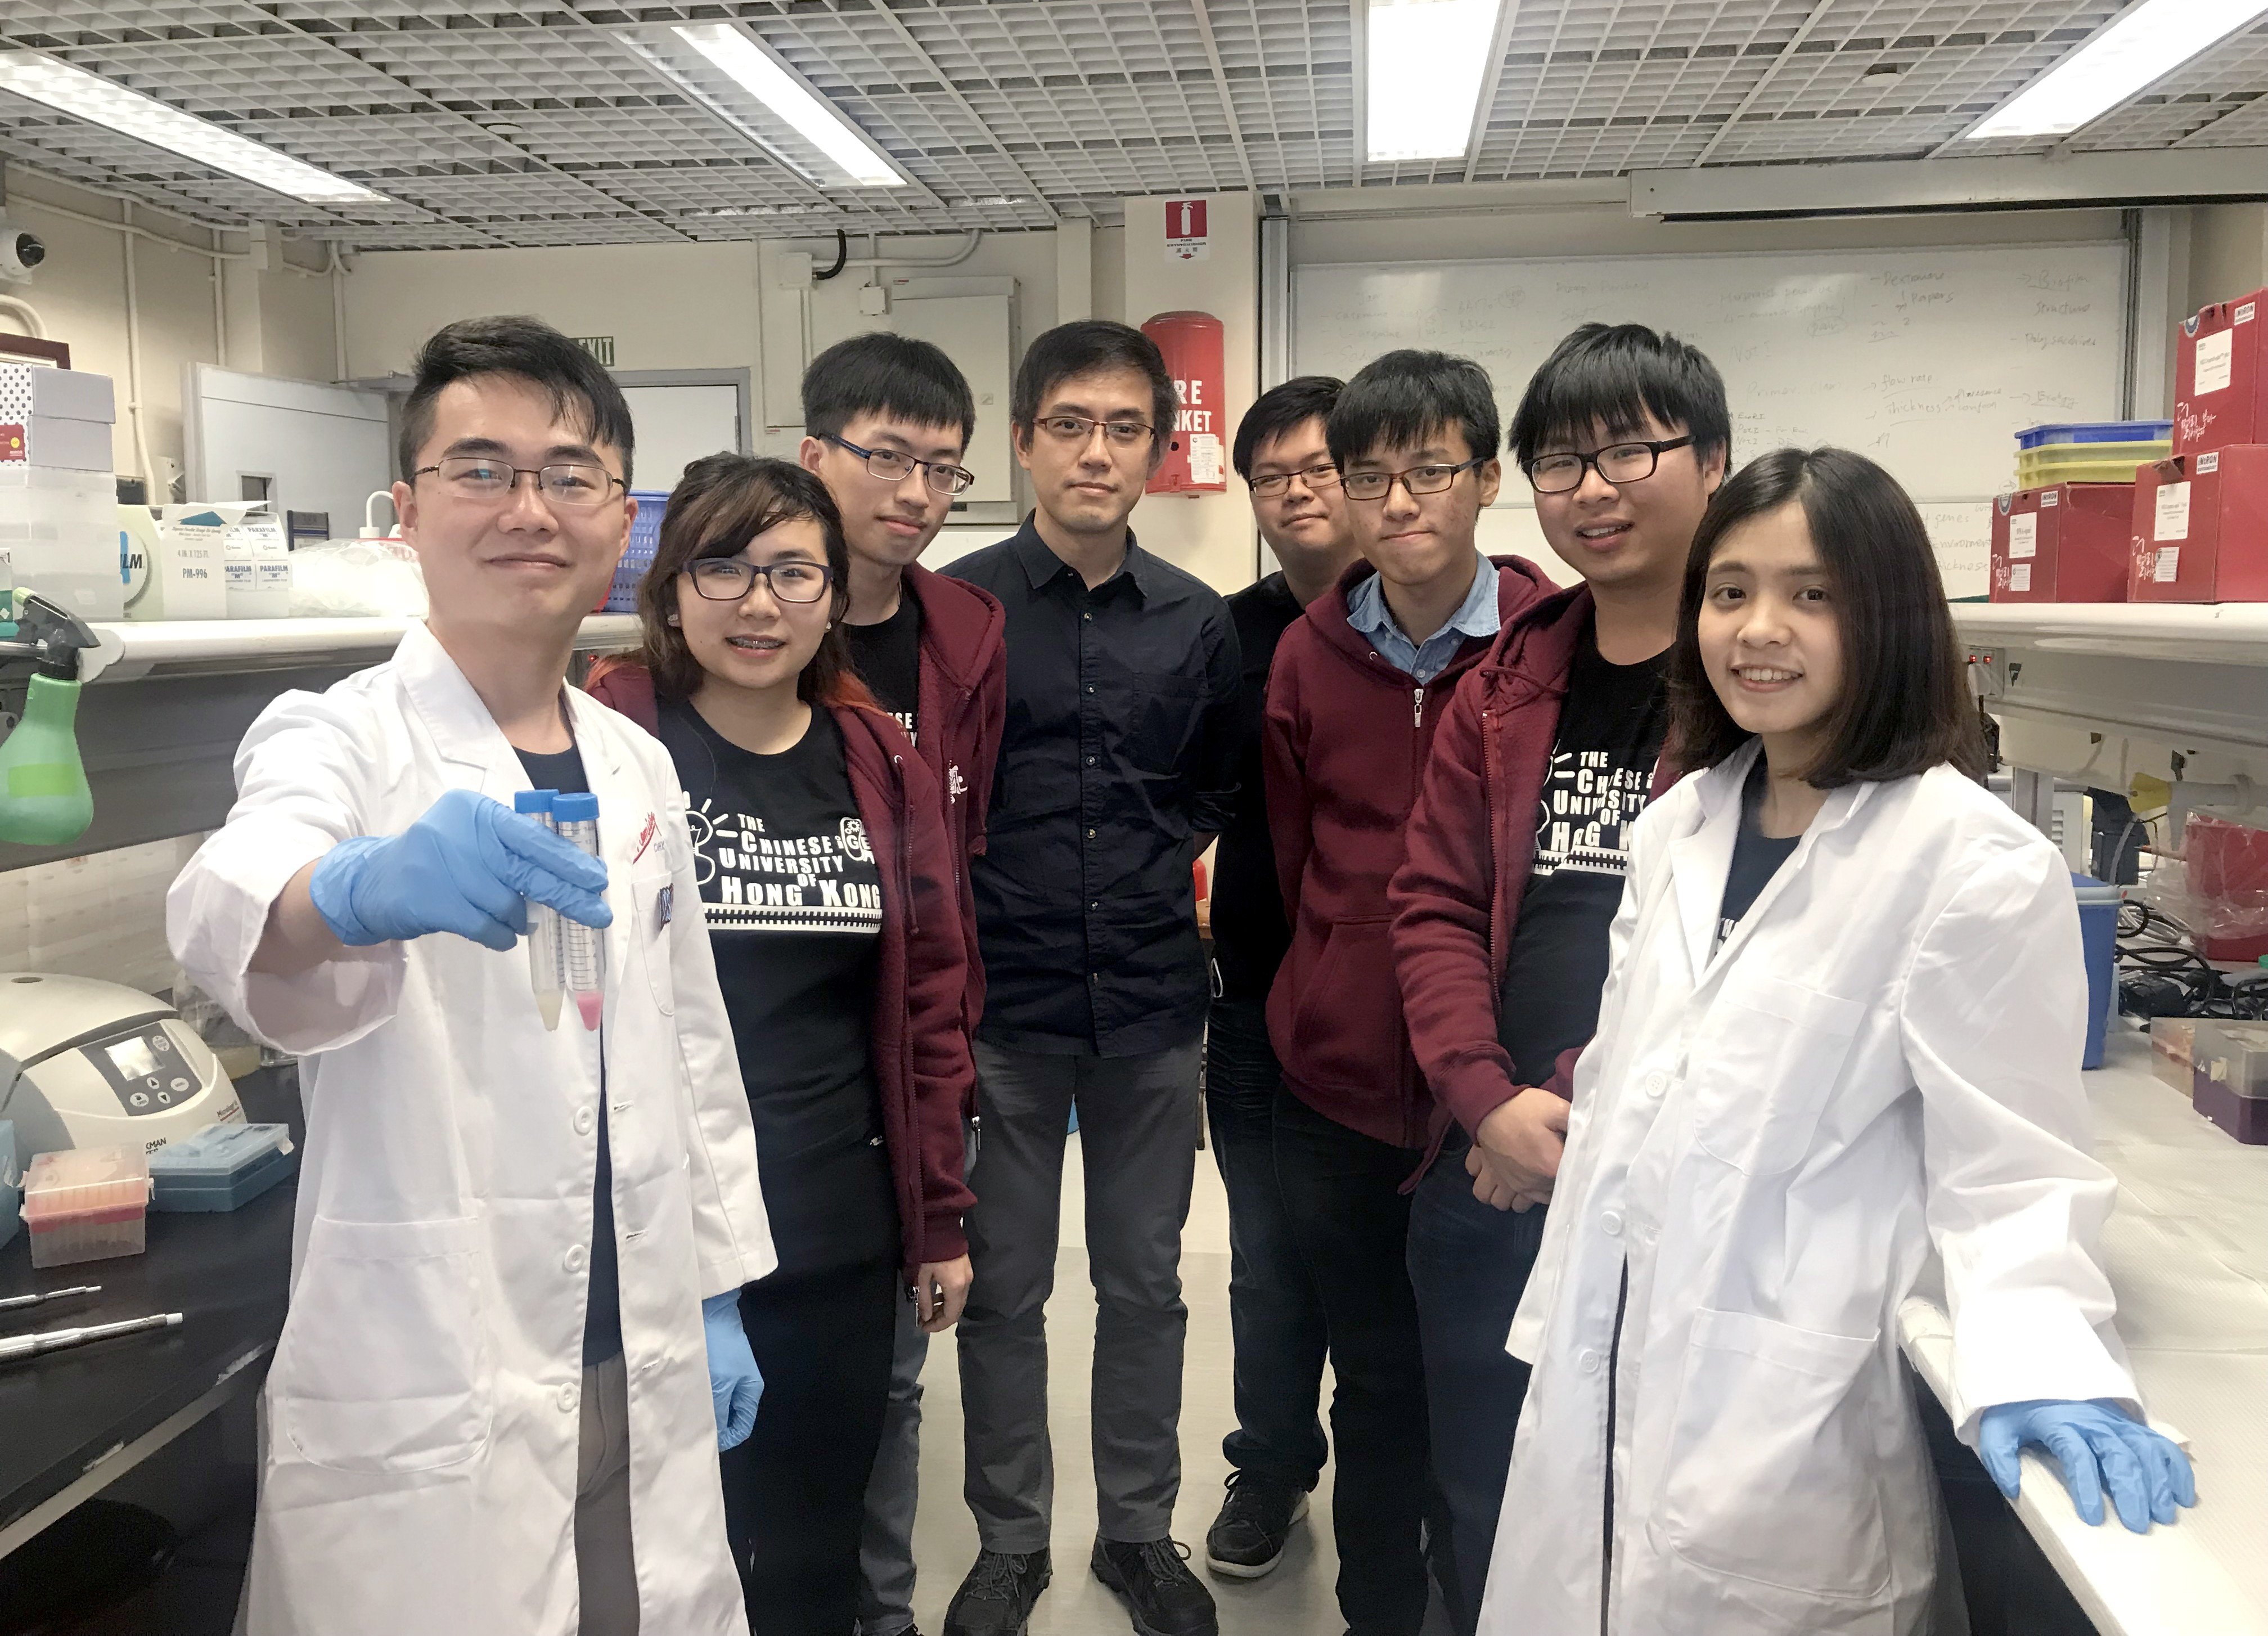 The group was among 108 teams from across the globe who won gold awards at an international competition for synthetic biology in the United States last month. Photo: Elizabeth Cheung